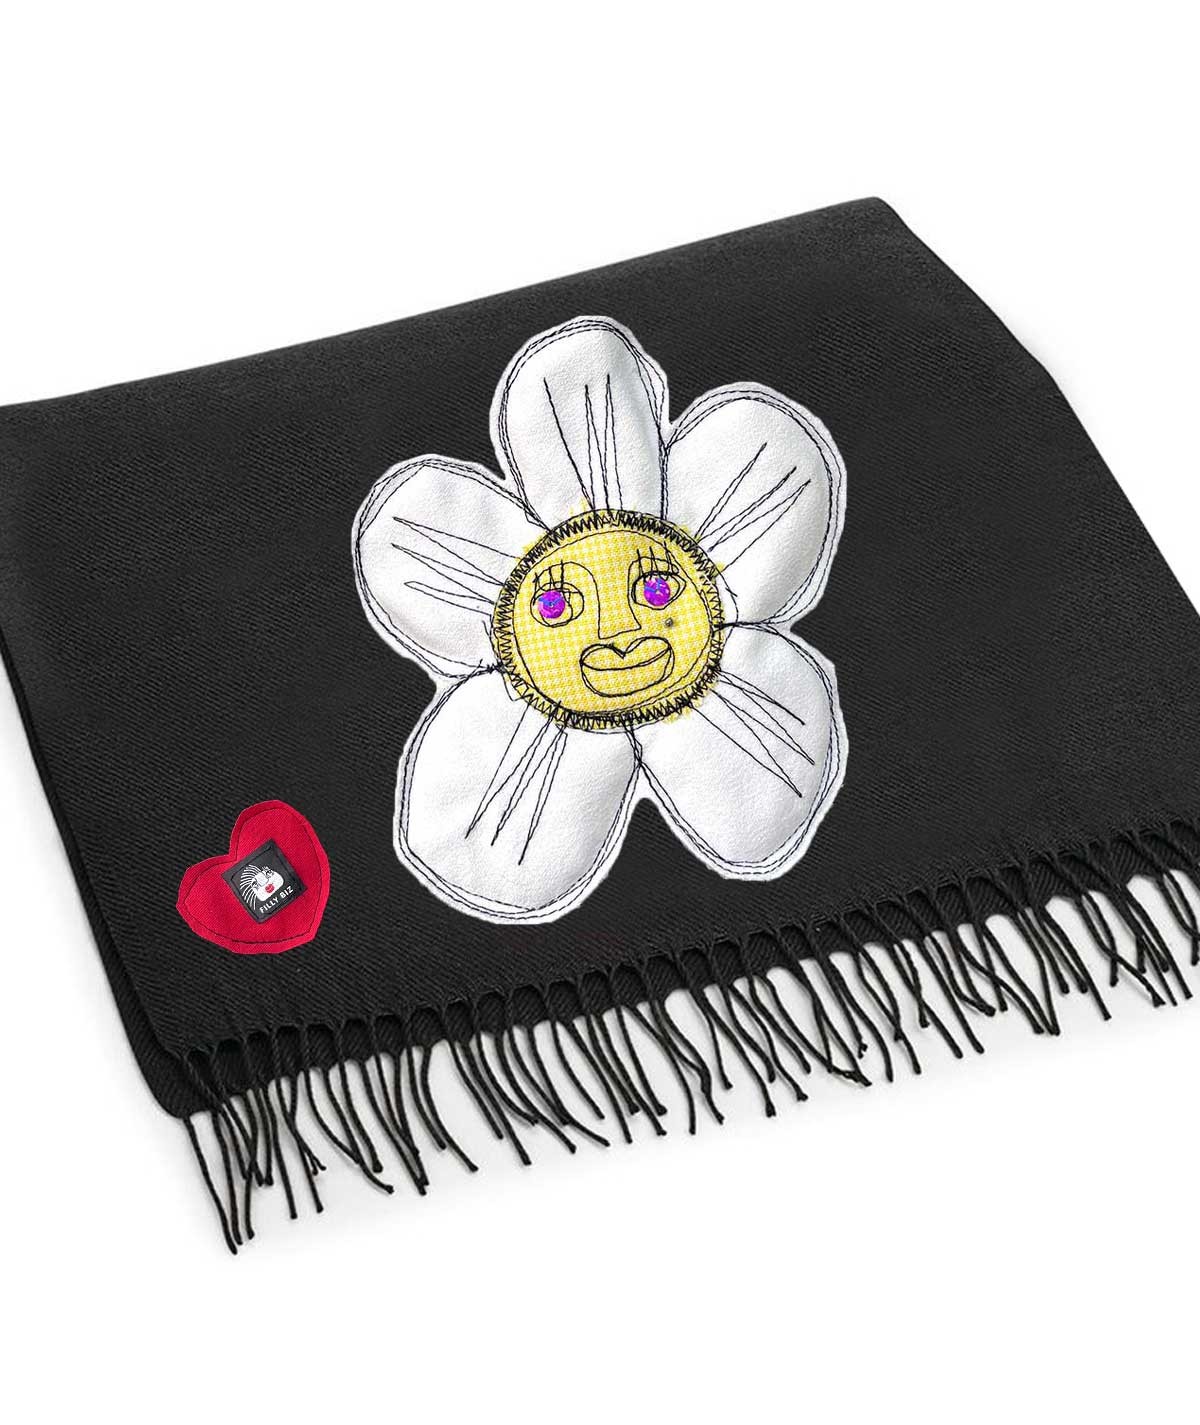 Black scarf with the daisy